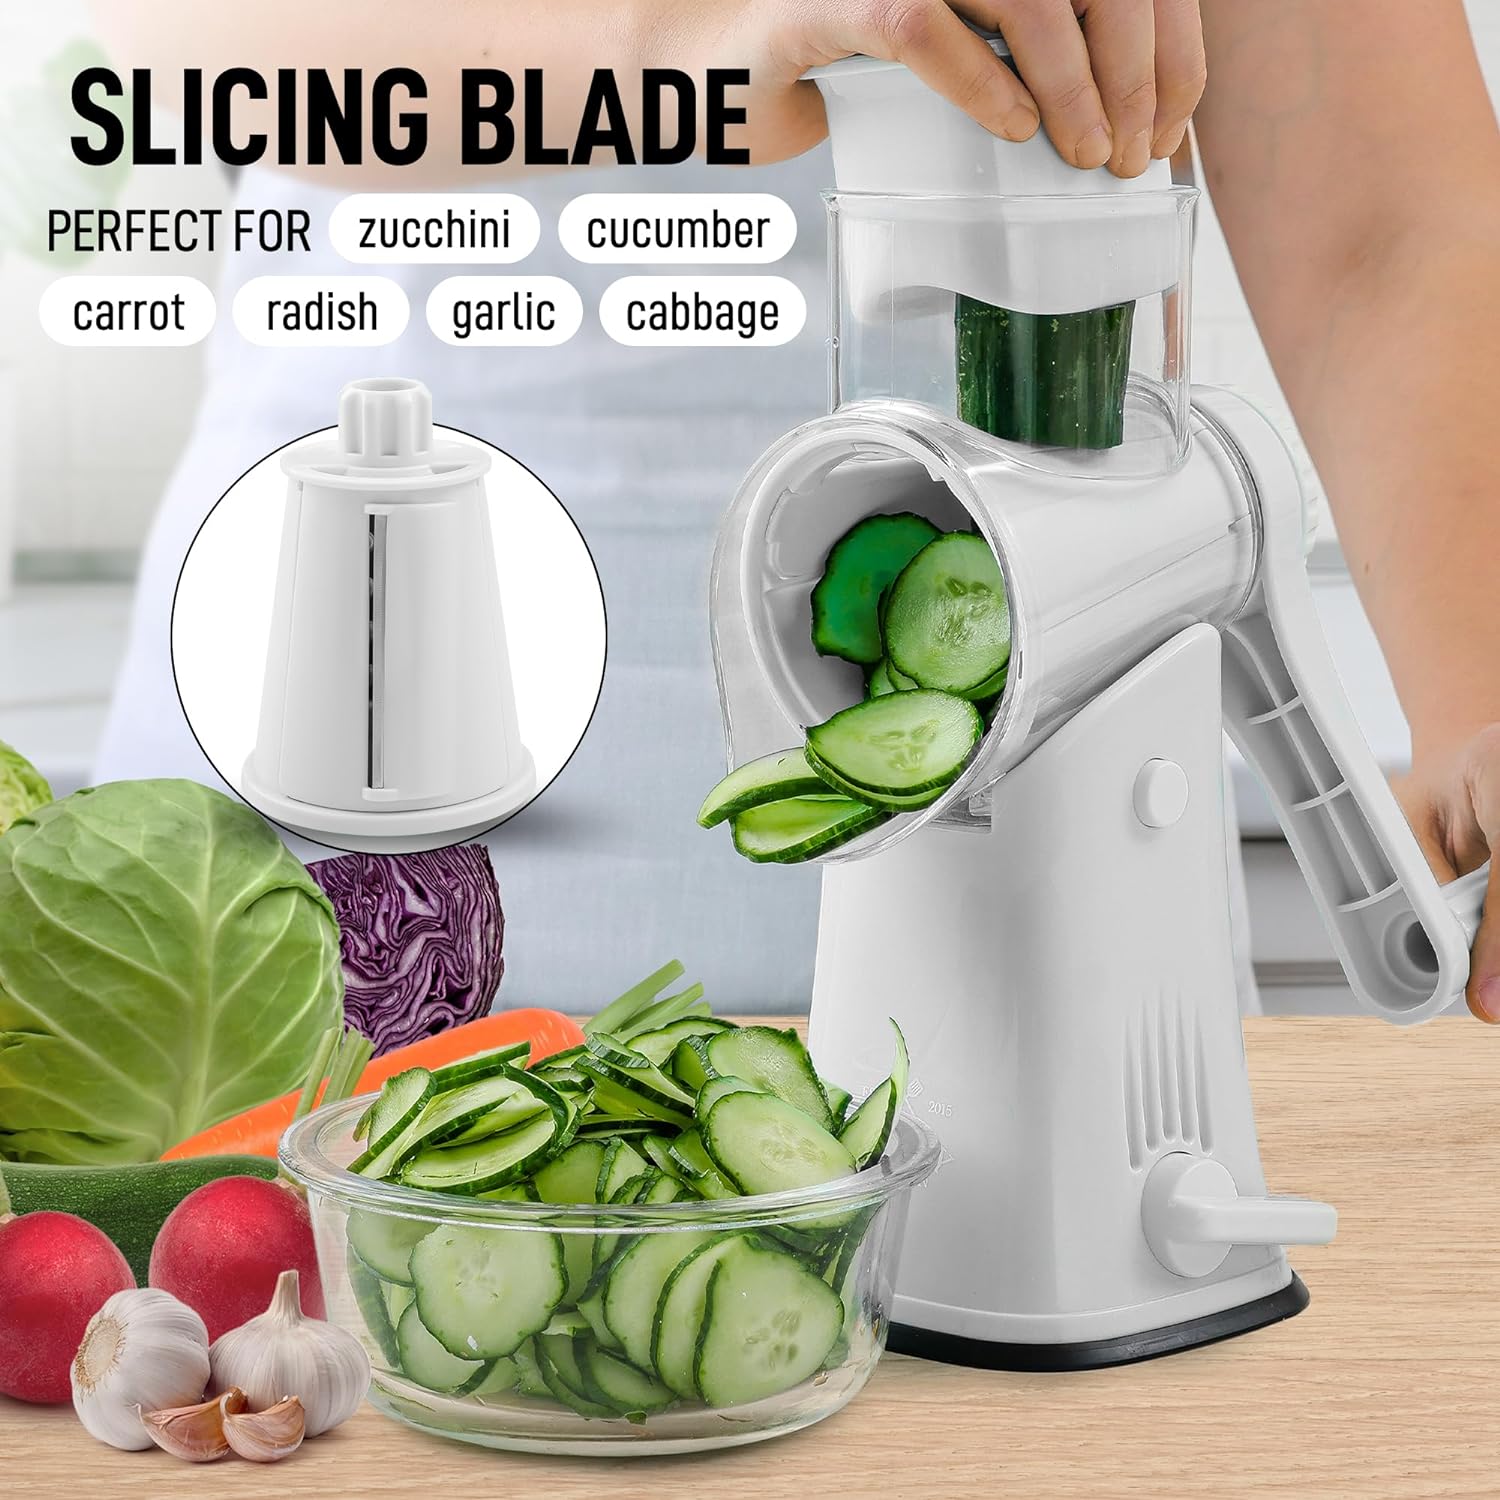  Cheese Grater Rotary, Rotary Grater for Kitchen, Kitchen Grater  Vegetable Slicer with 3 Drum Blades, Fast Cutting Cheese Shredder for  Vegetables and Nuts: Home & Kitchen